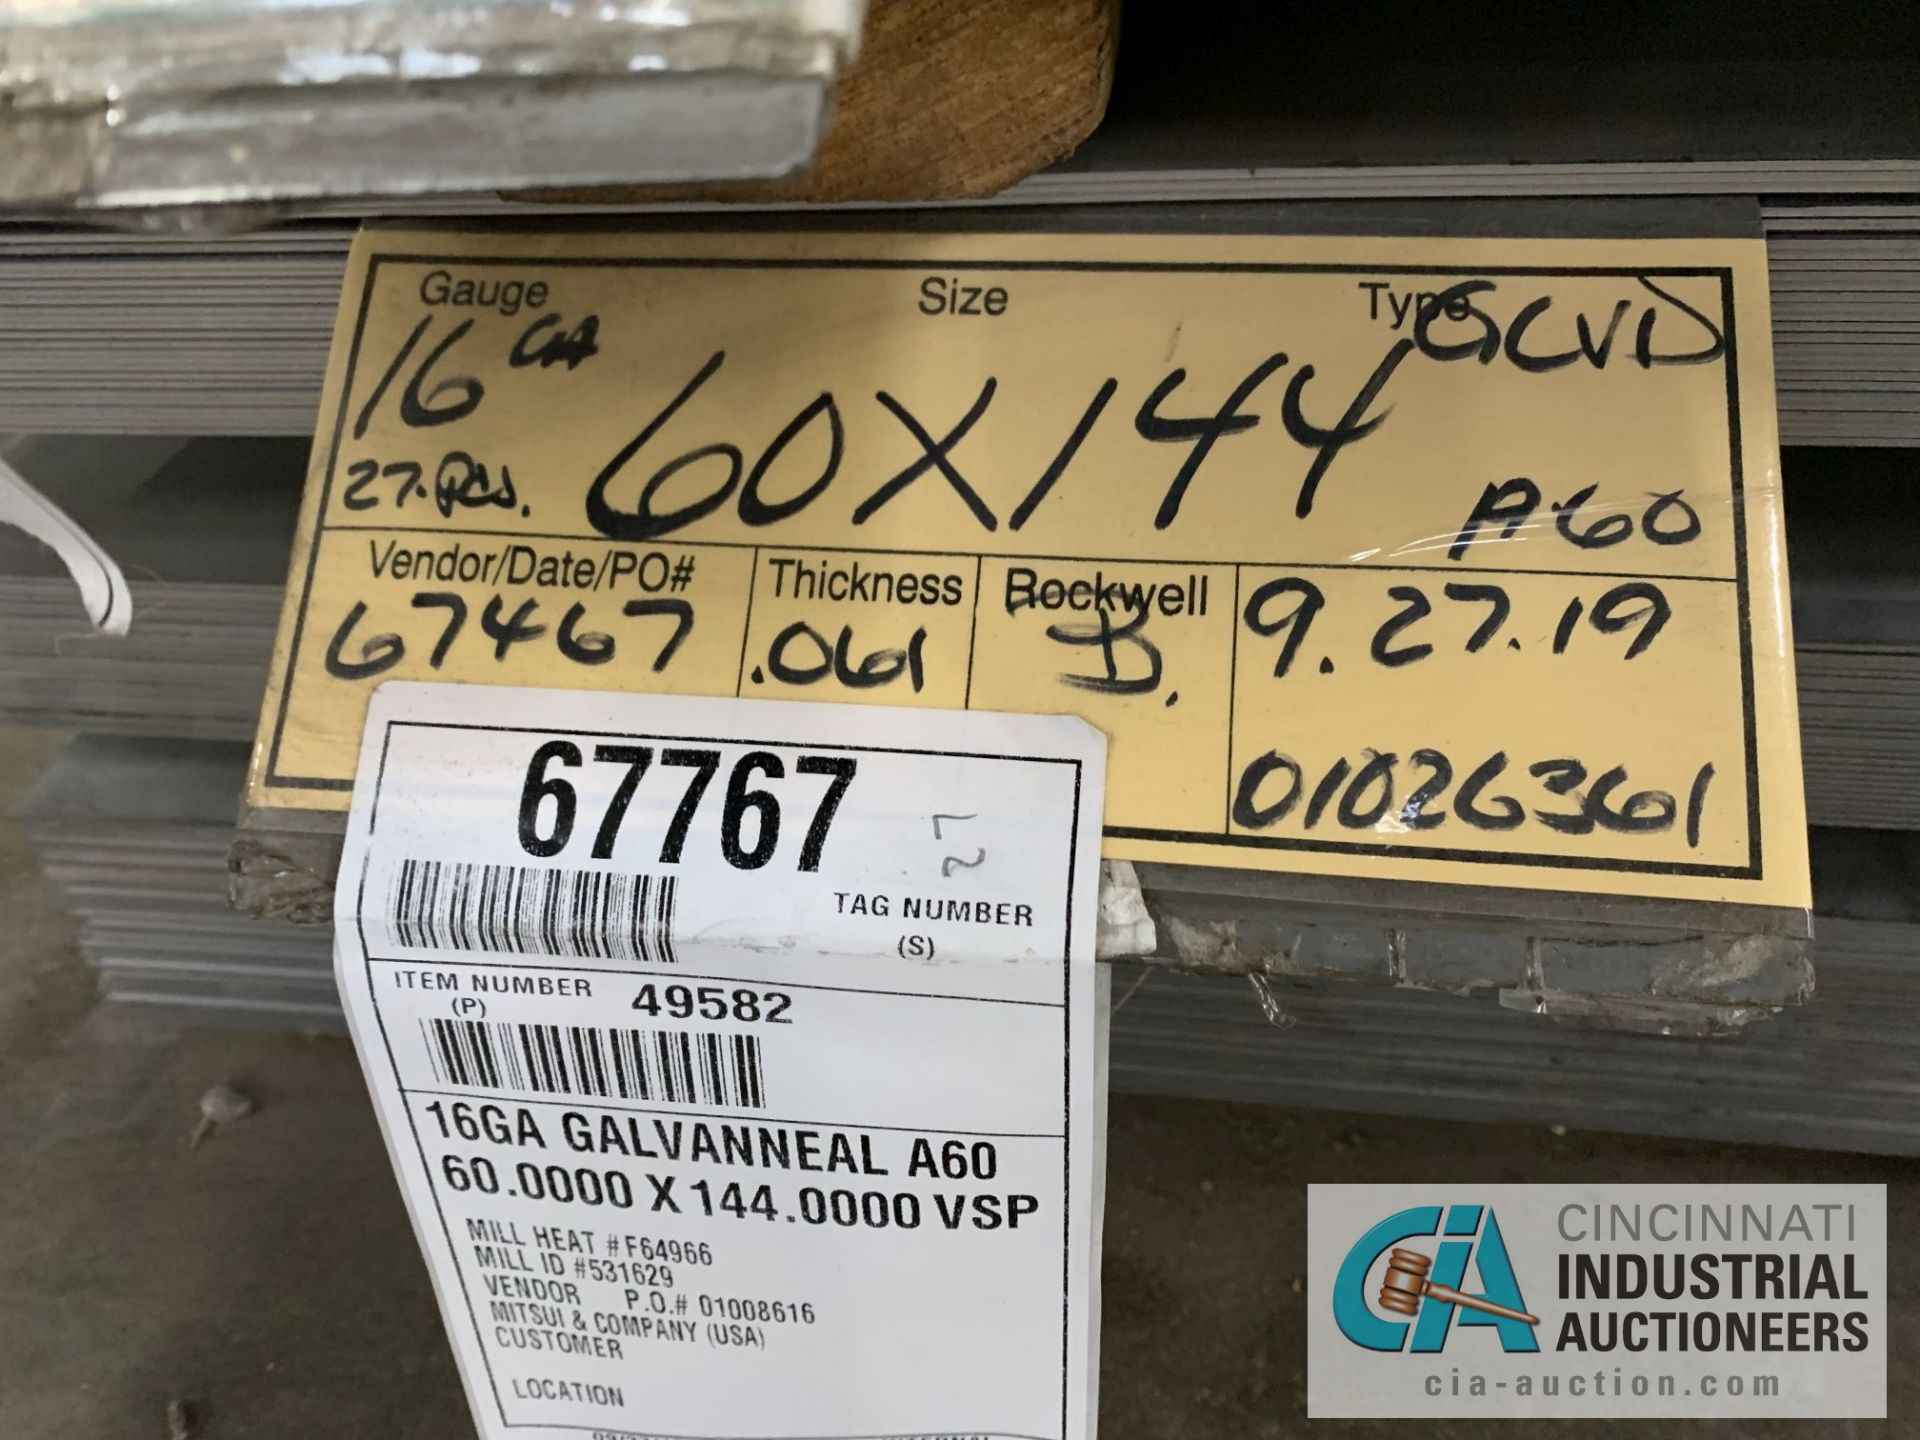 (LOT) APPROX. 28,498 LBS. COATED SHEET STEEL, 1-STACK, 3-BUNDLES, SEE INVENTORY FOR LISTING. - Image 4 of 6